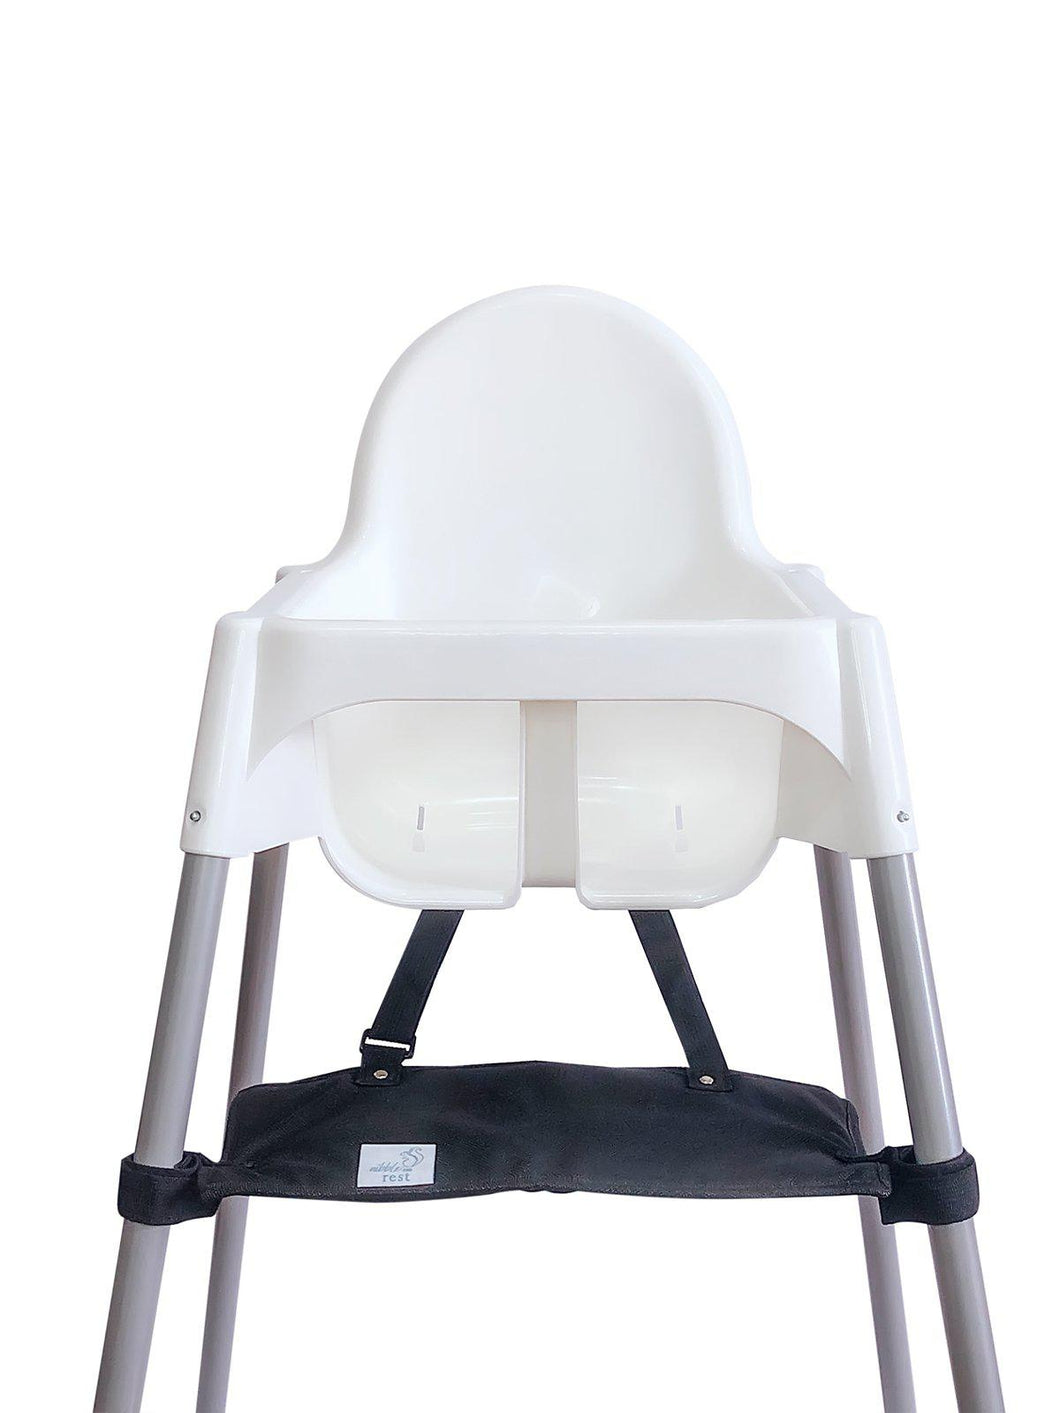 Footsi® High Chair Footrest - Black - mytinyfingers baby products